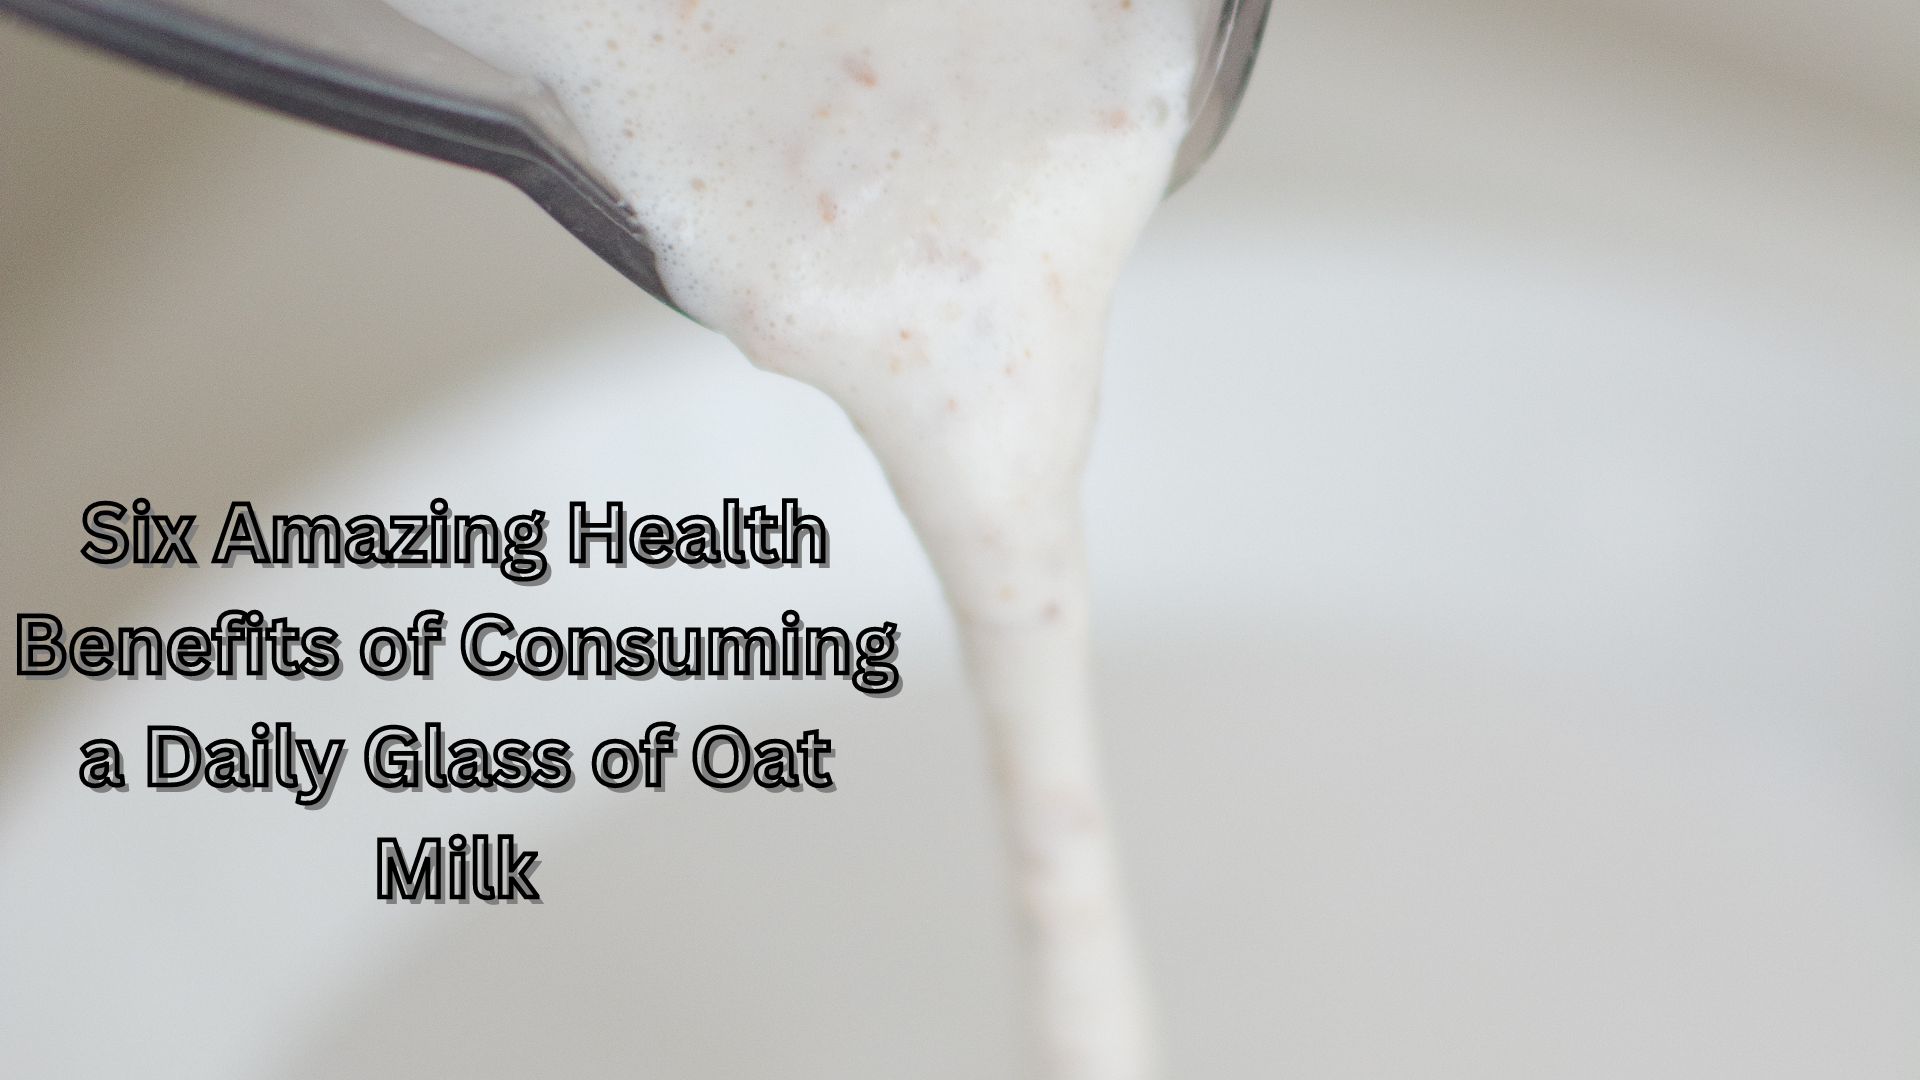 Six Amazing Health Benefits of Consuming a Daily Glass of Oat Milk